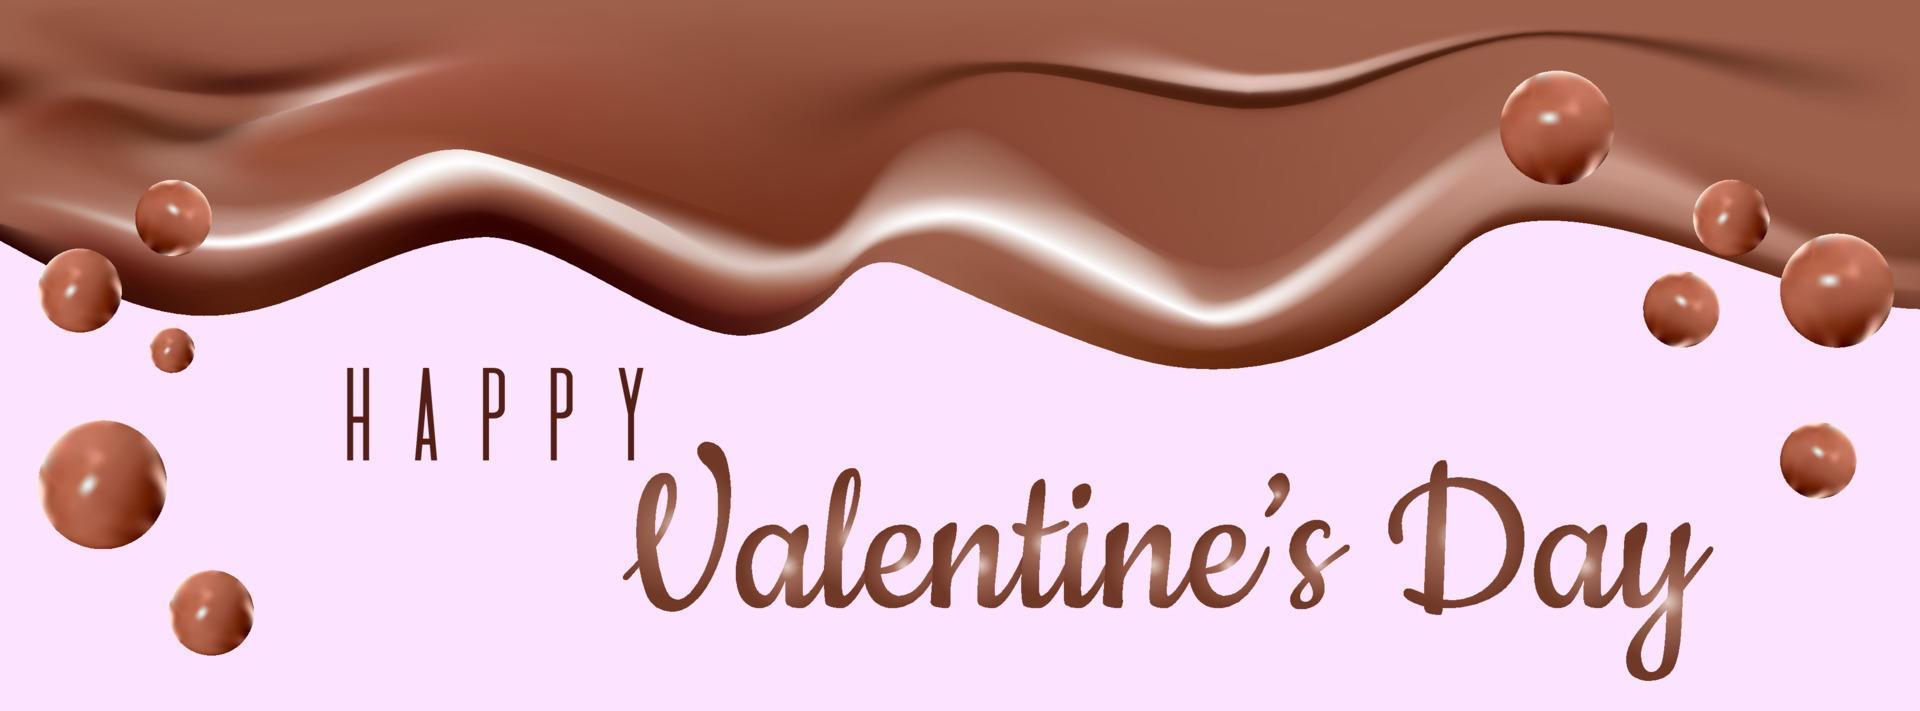 Happy Valentine s Day banner, greeting card for Valentine s Day with hearts on a pink background. Dripping Melted Chocolates Isoalted. Realistic 3d Illustration of Liquid Chocolate ream or Syrup. vector